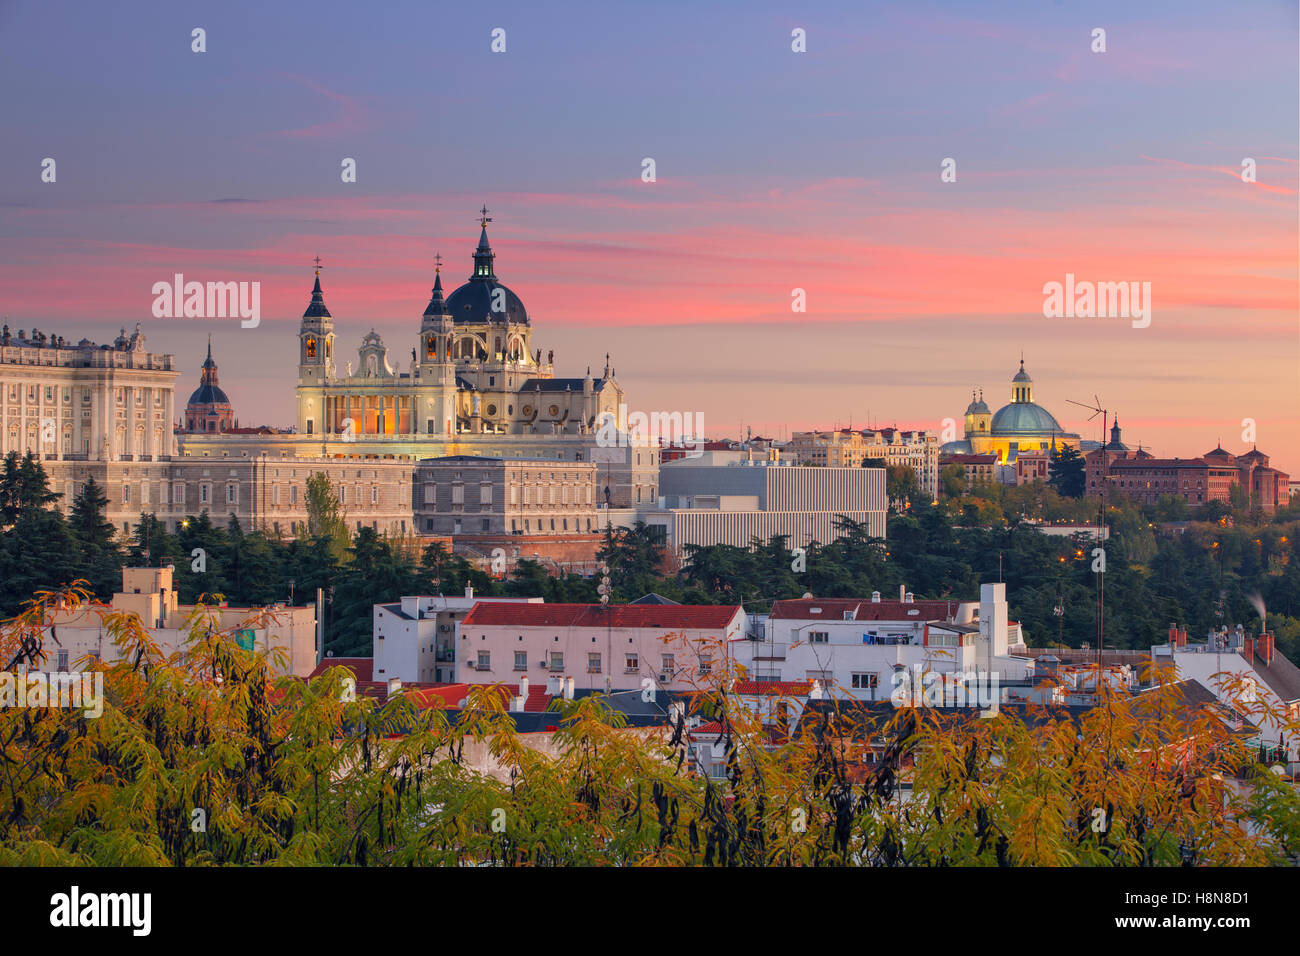 Image of Madrid Skyline with Santa Maria la Real de La Almudena Cathedral and the Royal Palace during sunset. Stock Photo